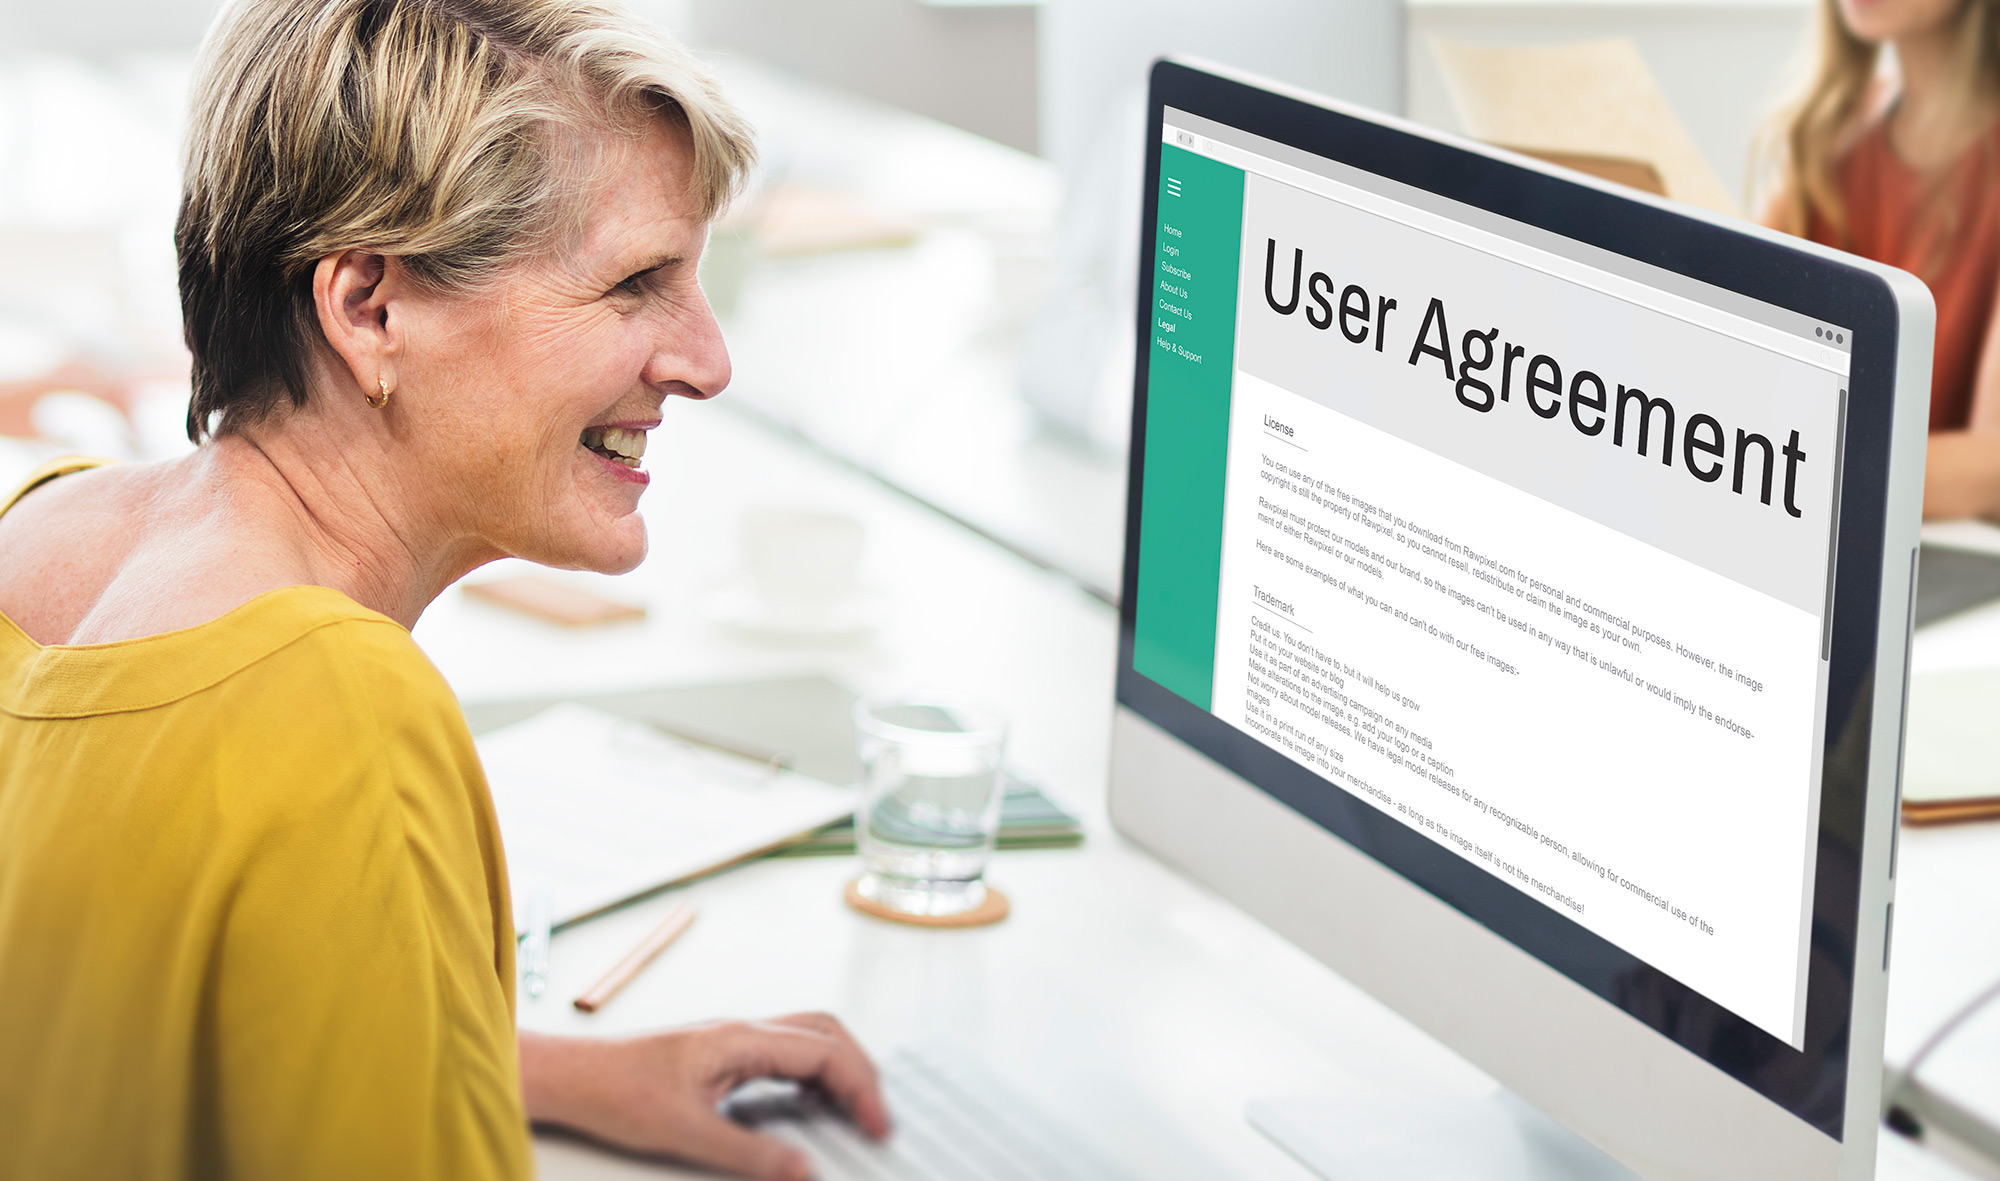 Users Agreement Terms and Conditions Rule Policy Regulation Con